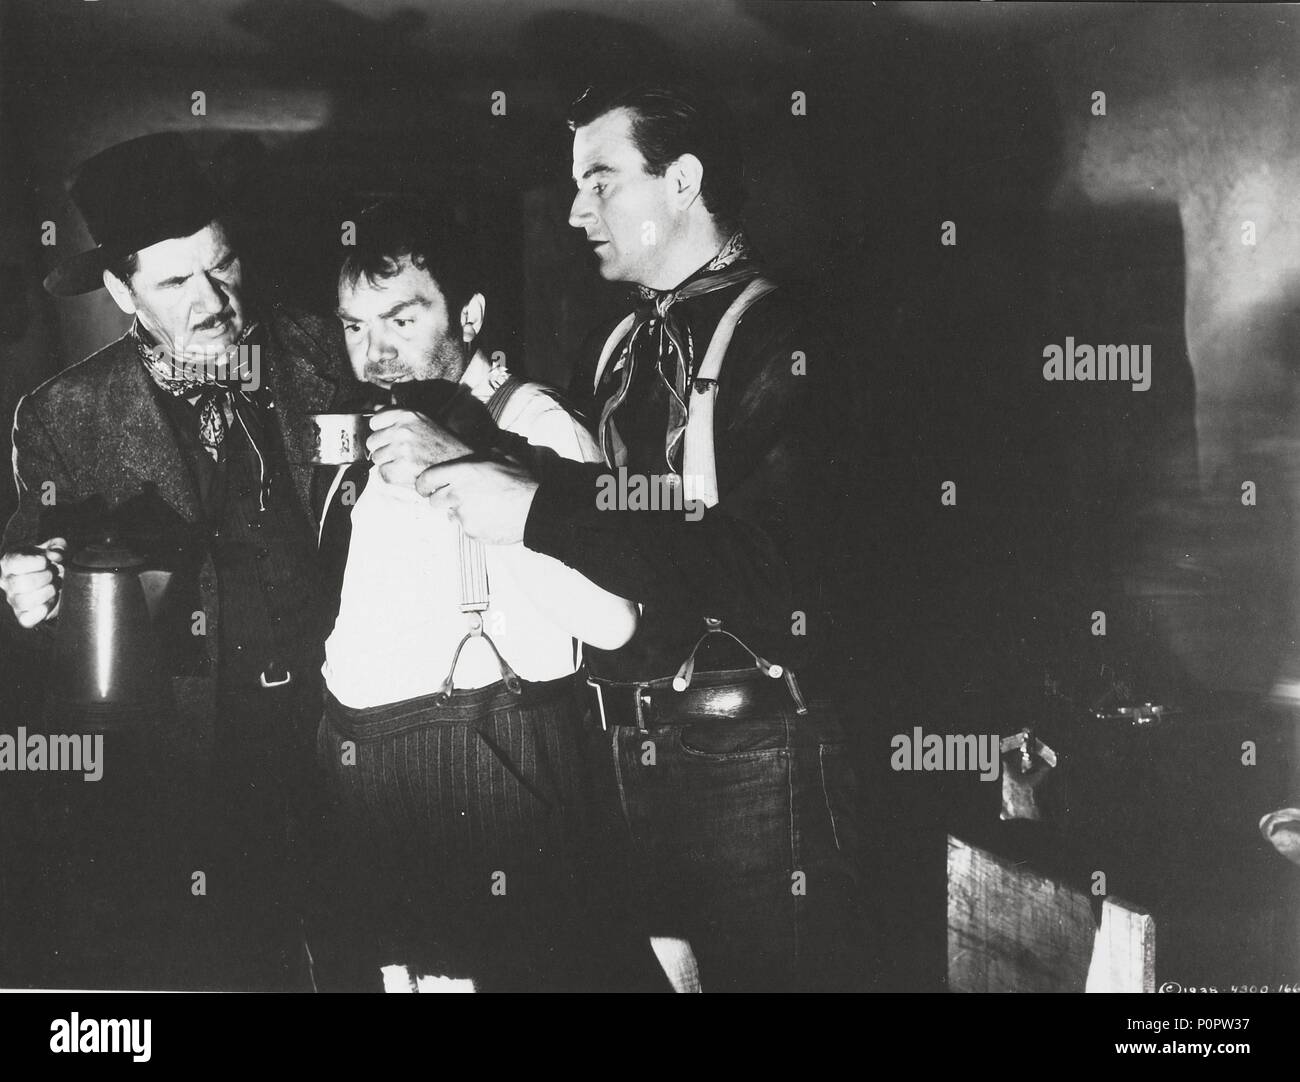 THOMAS MITCHELL in costume as Driscoll with Artist ROBERT PHILIPP and his  Portrait Painting of the actor in THE LONG VOYAGE HOME 1940 director JOHN  FORD based on Four Sea Plays by